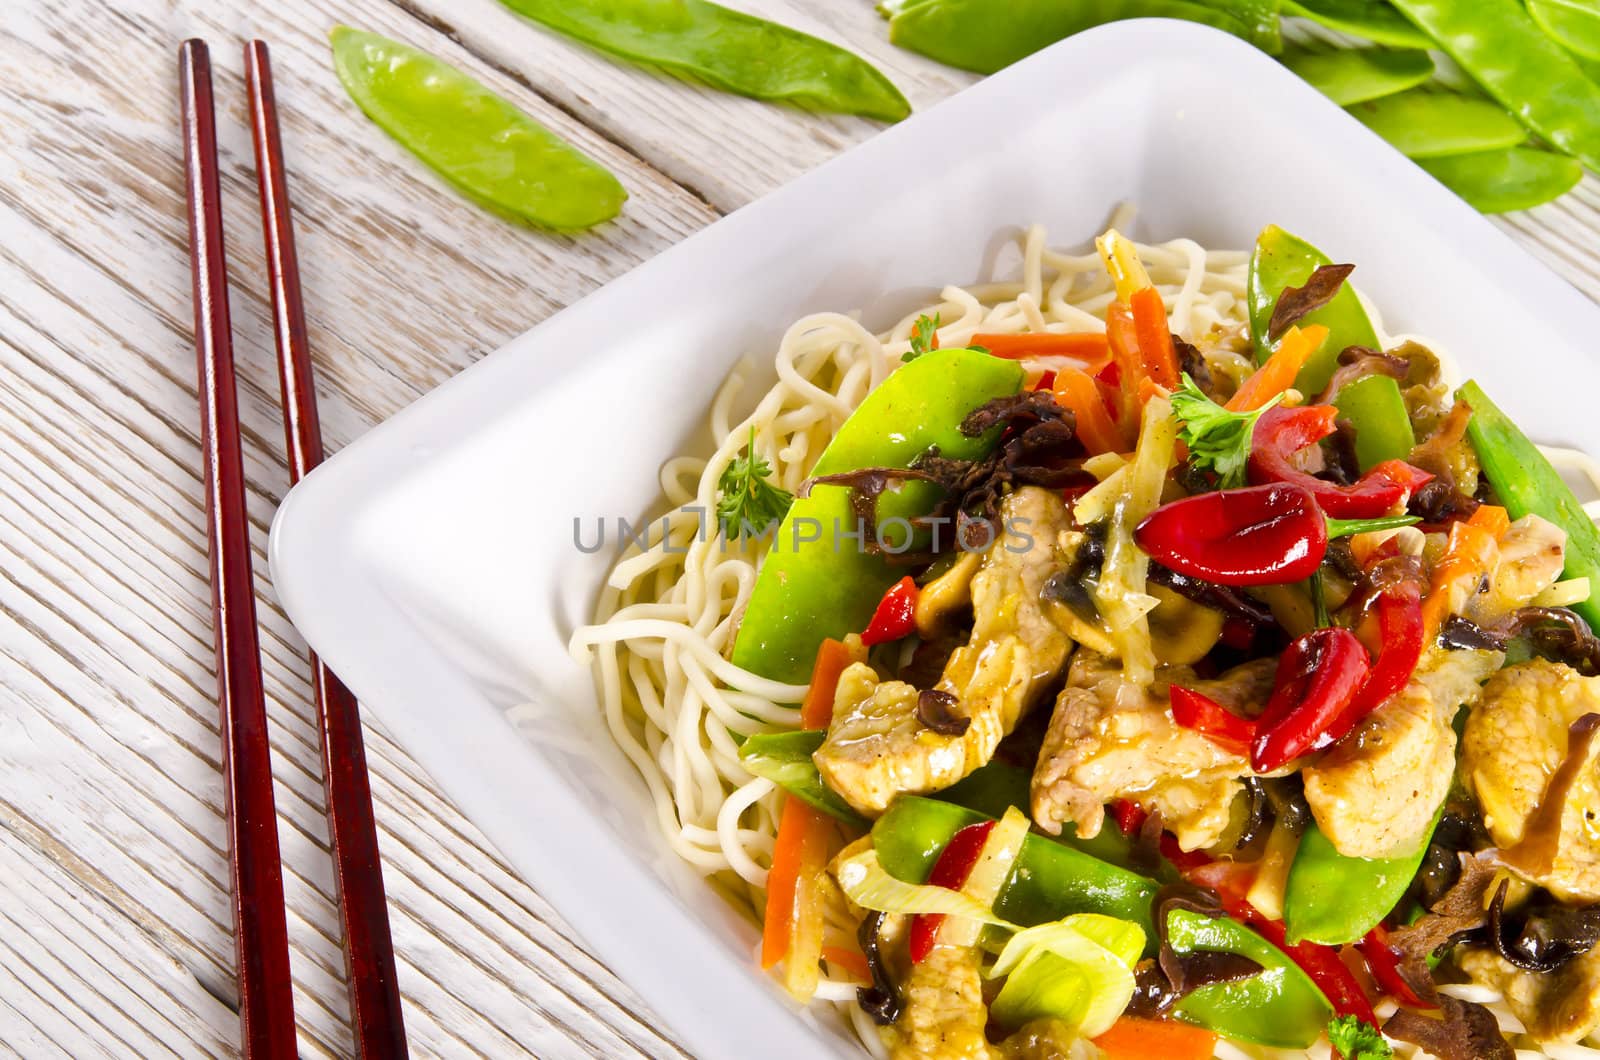 Noodles with pork and vegetables in plum sauce by Darius.Dzinnik